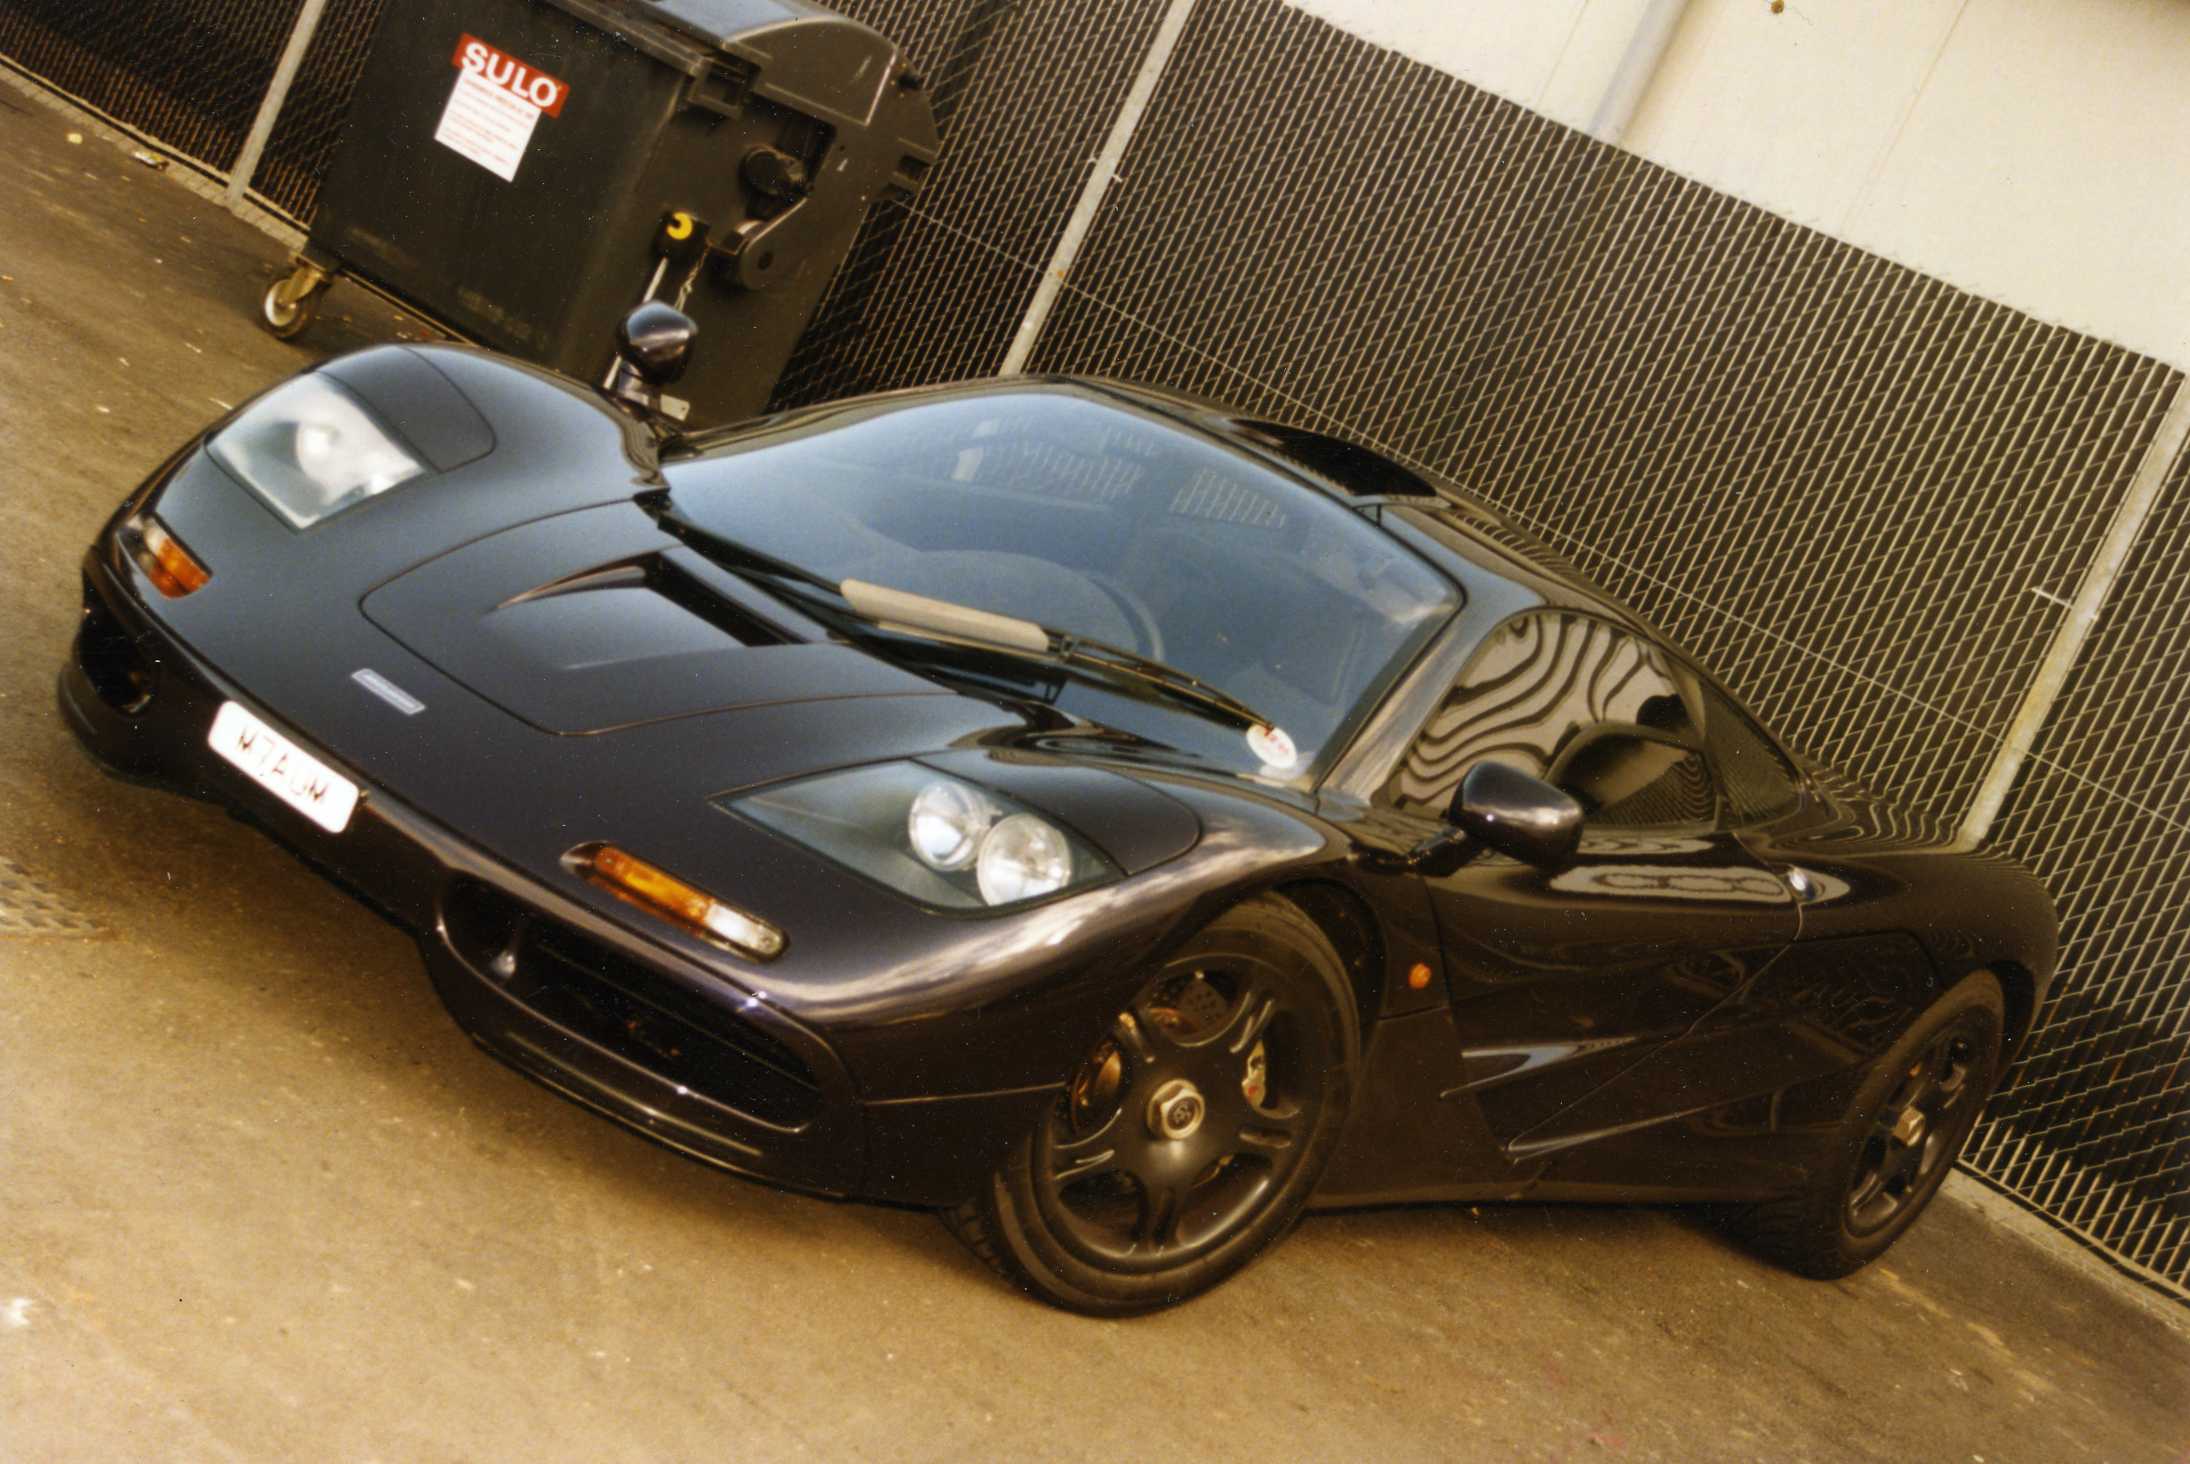 Alastair Ladd on Twitter: "George Harrison's McLaren F1. I took these at  Silverstone in 1997 https://t.co/L8gQDNVLHD" / Twitter